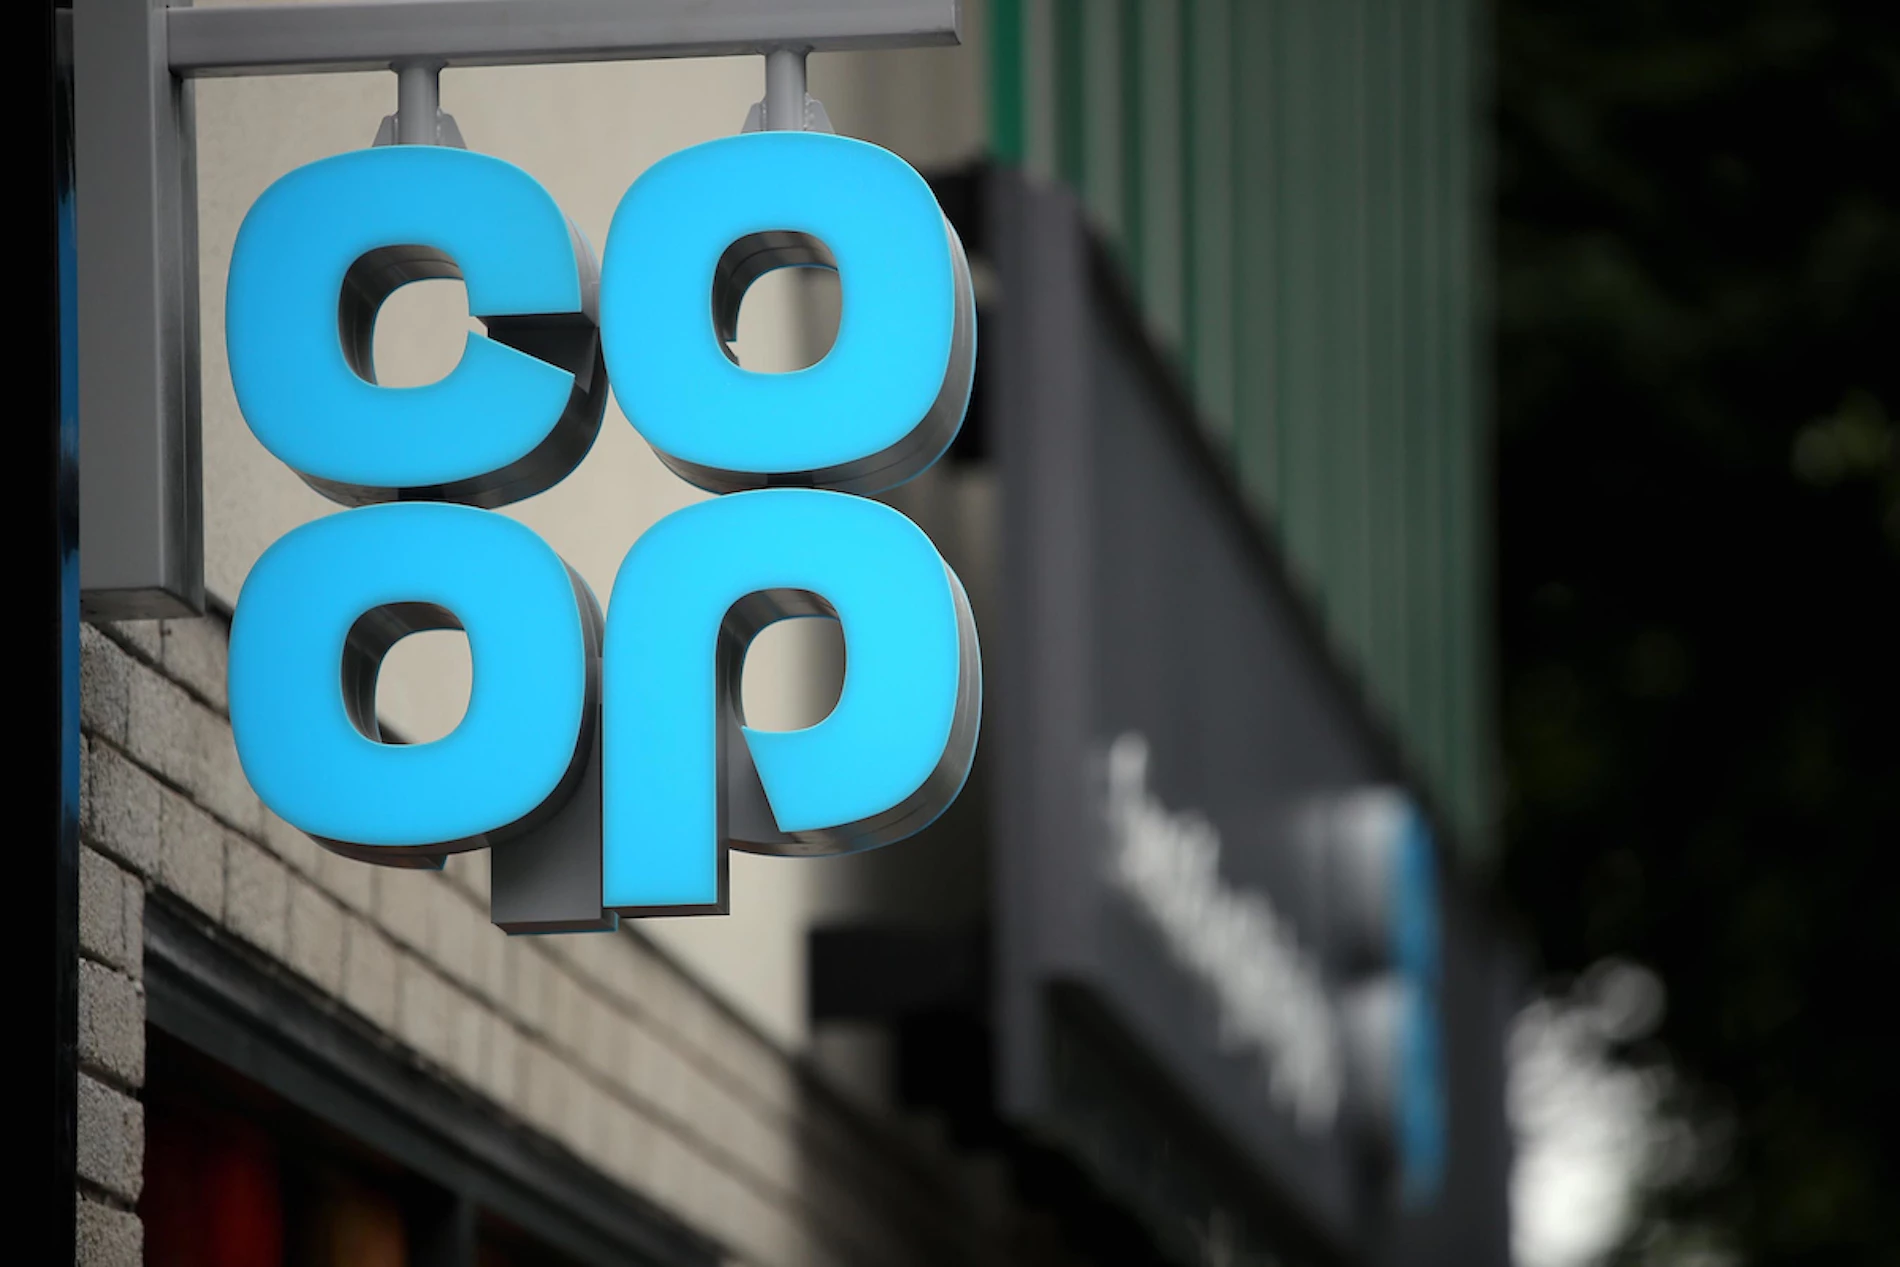 Co-op has reverted to its “clover-leaf” design logo, first used in the 1960’s